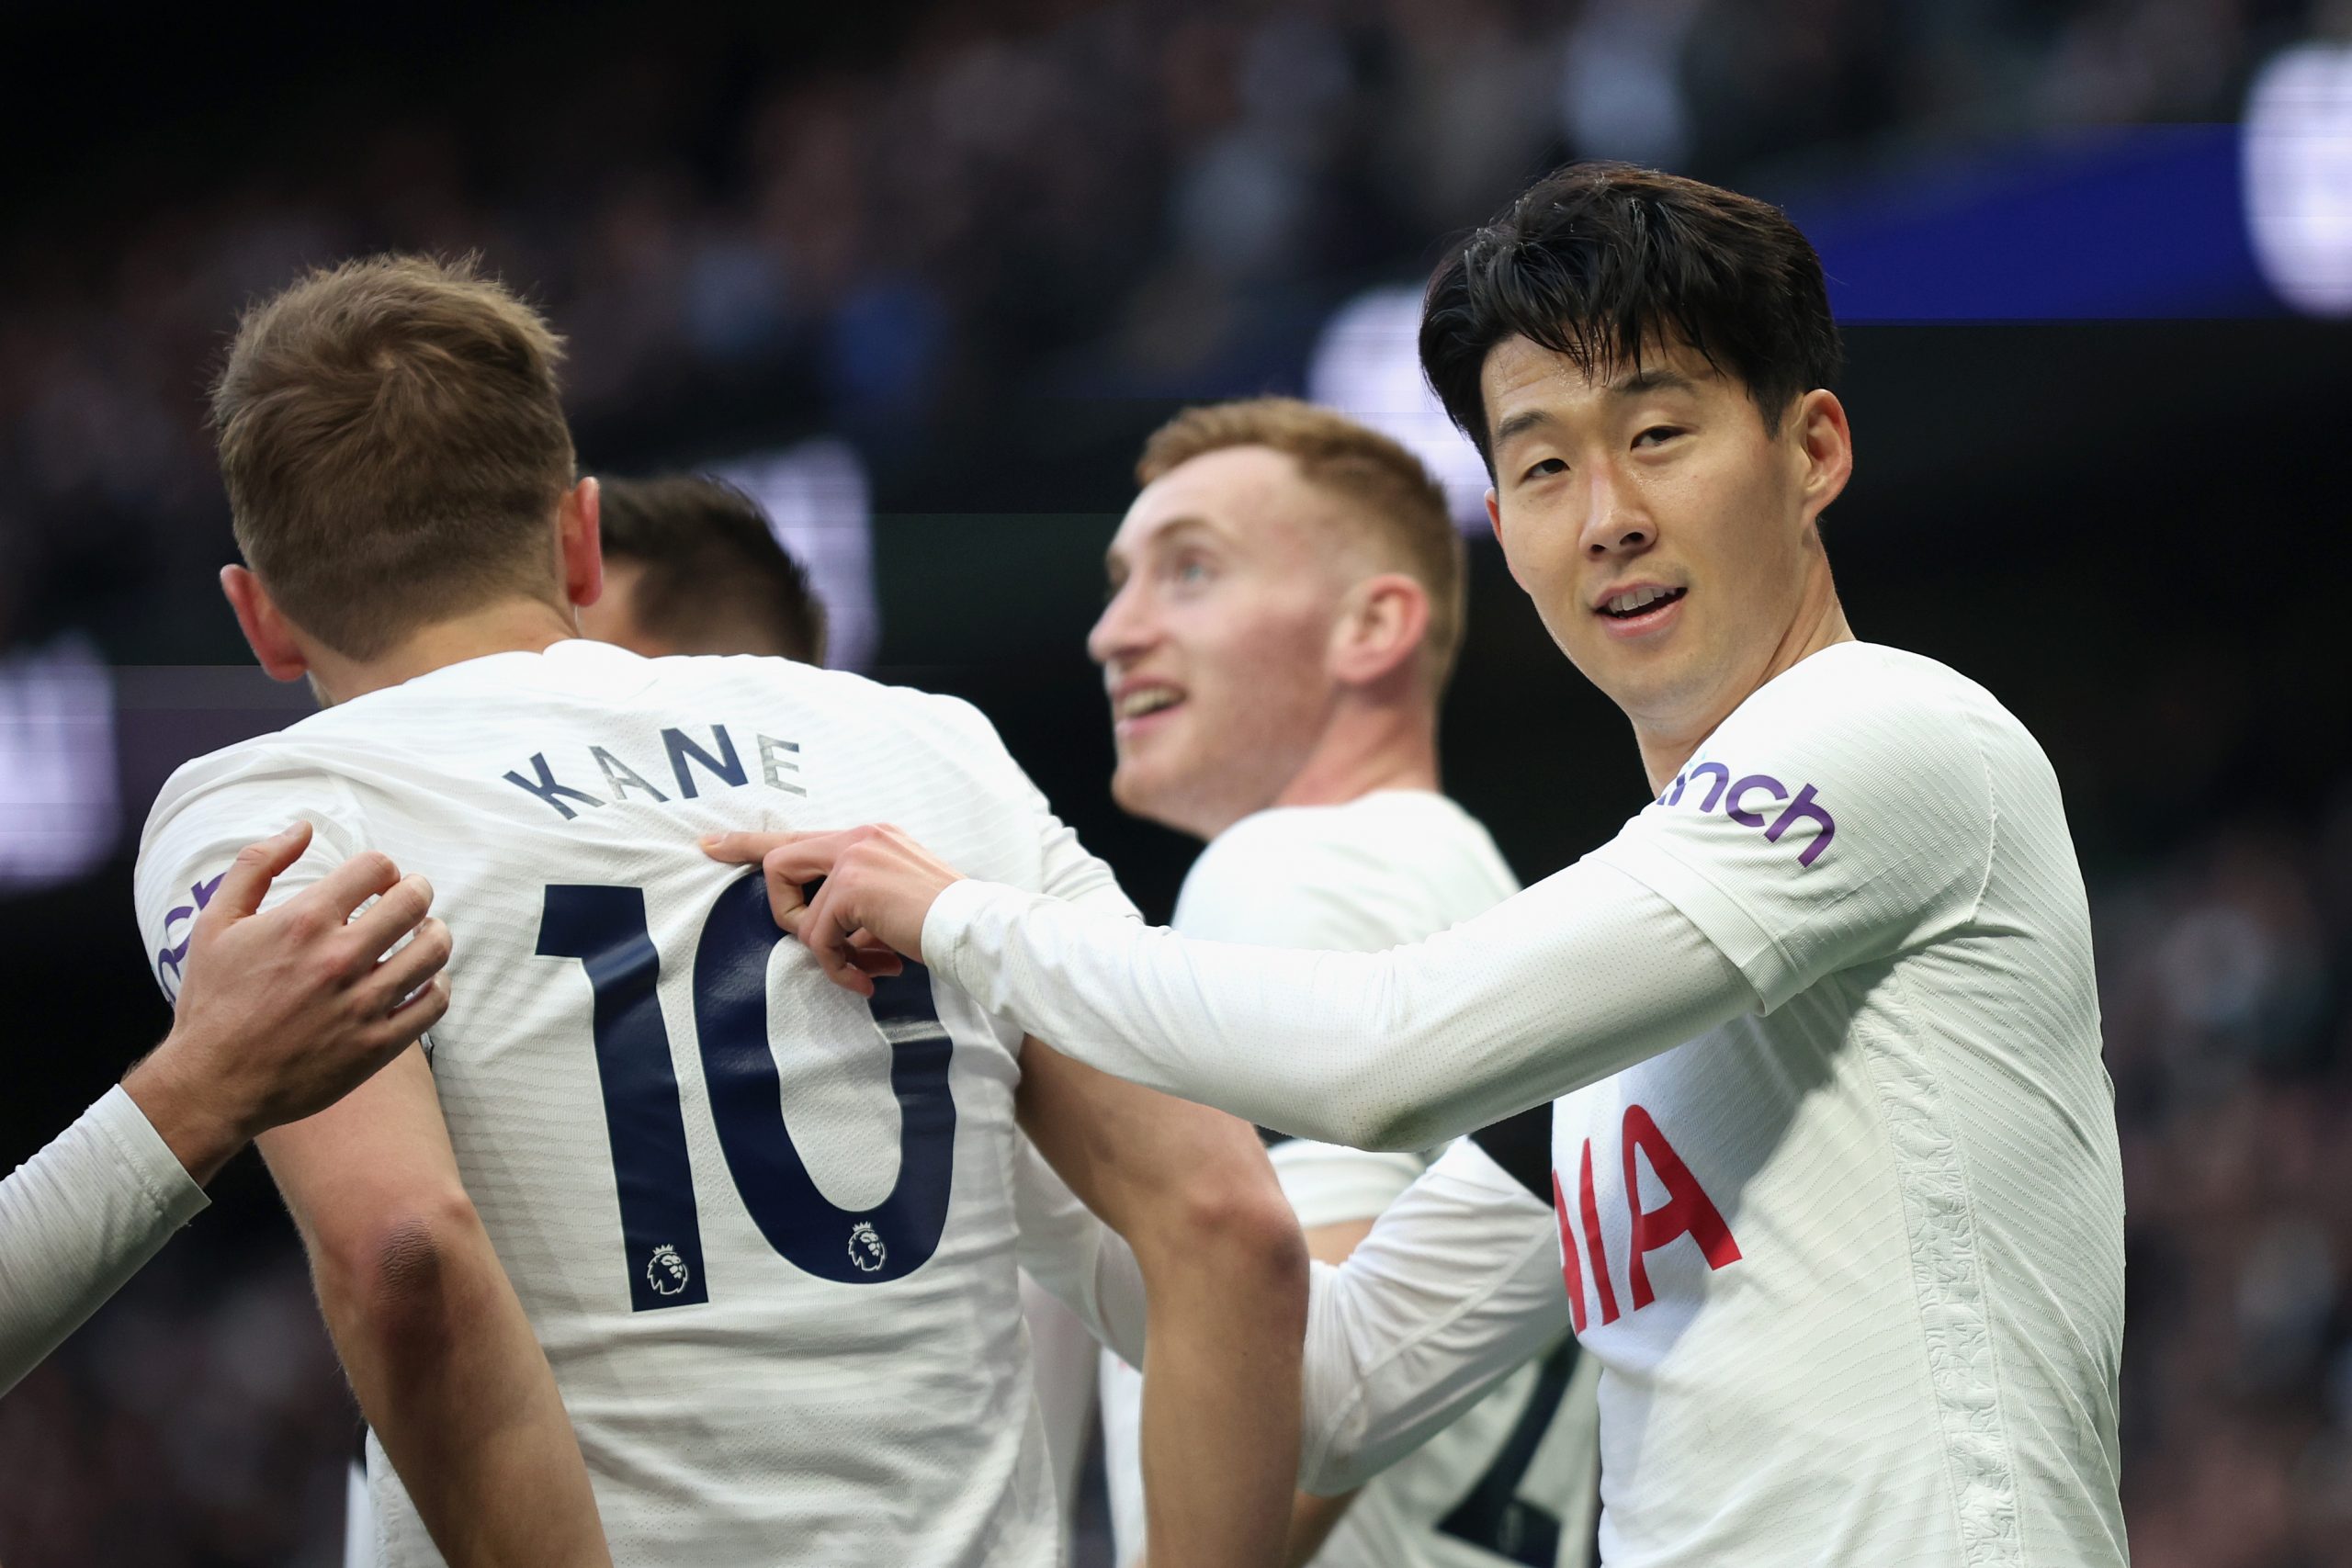 Tottenham told to win the remaining nine games by Conte. (Photo by Eddie Keogh/Getty Images)